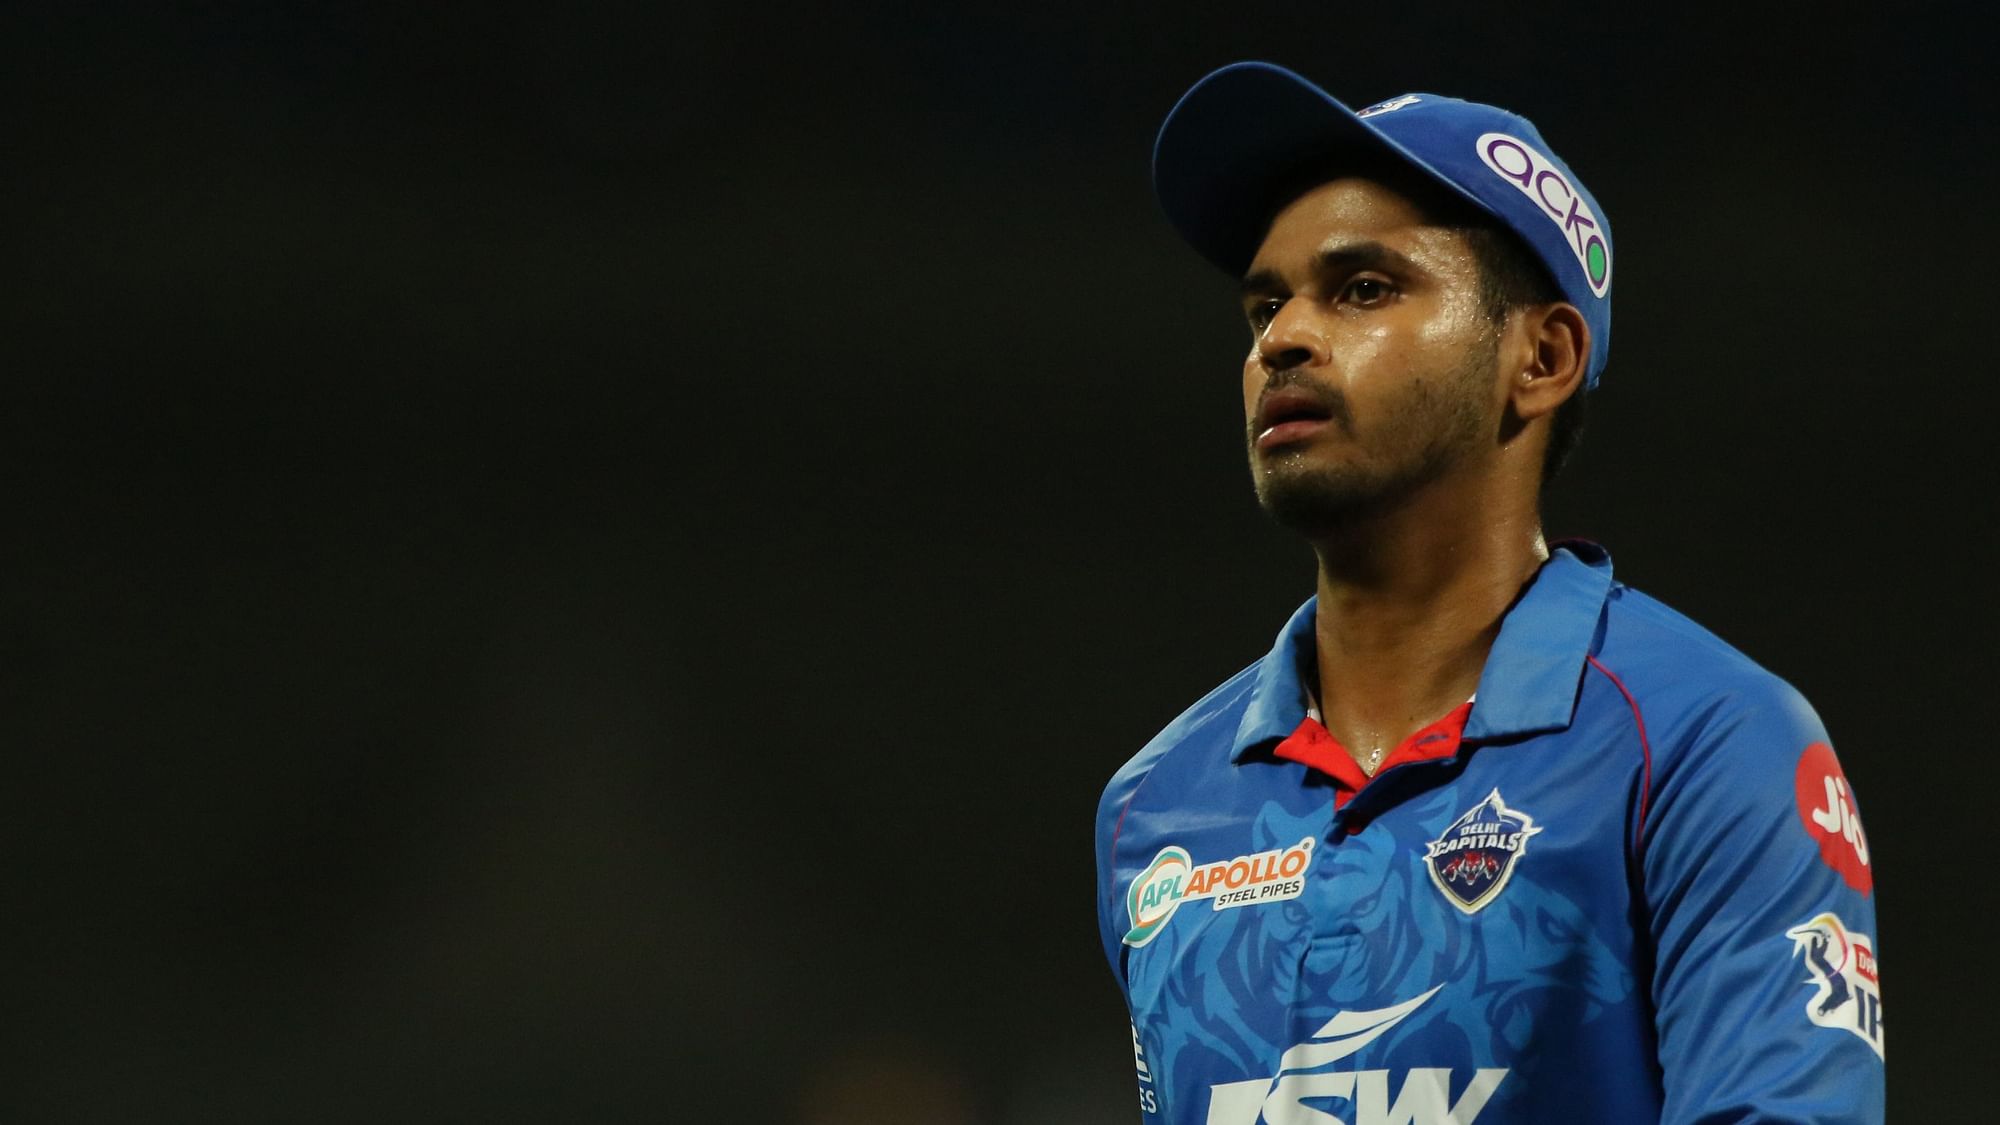 Mumbai Indians handed Delhi Capitals their second loss this season in a closely-contested IPL match.